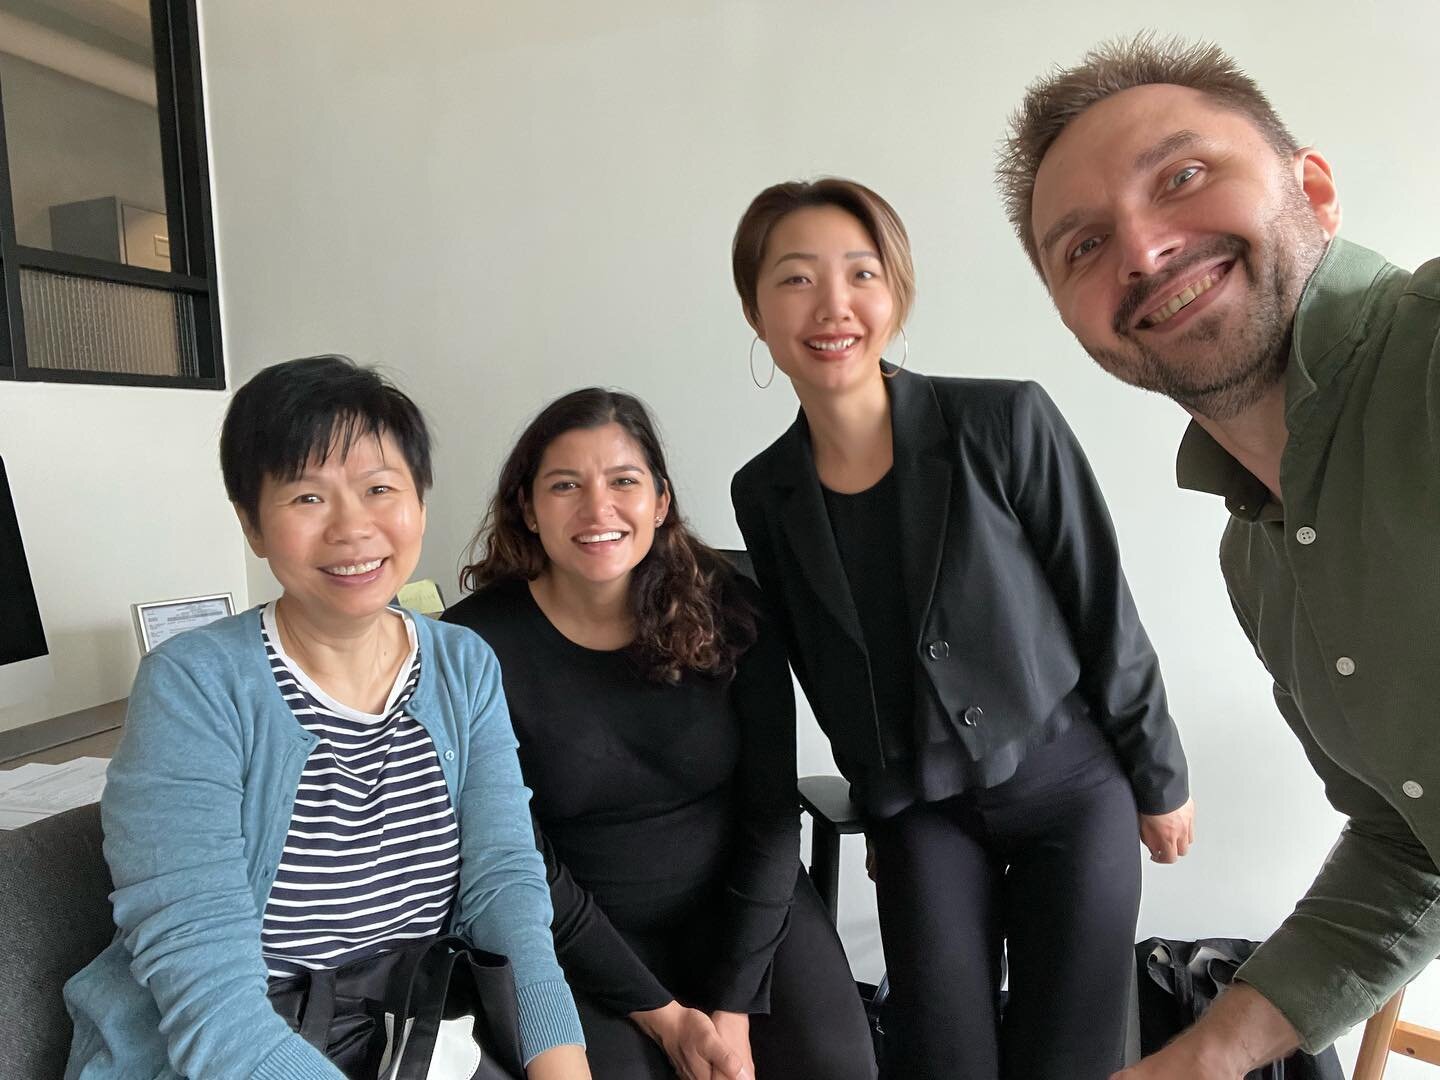 EdTech HK 🇭🇰 is here to support all the educational and people development professionals in Hong Kong. We bring technology insights, new connections, and awareness. We bring designers of @positplace, educators of Esperanza, hands-on insights in ins